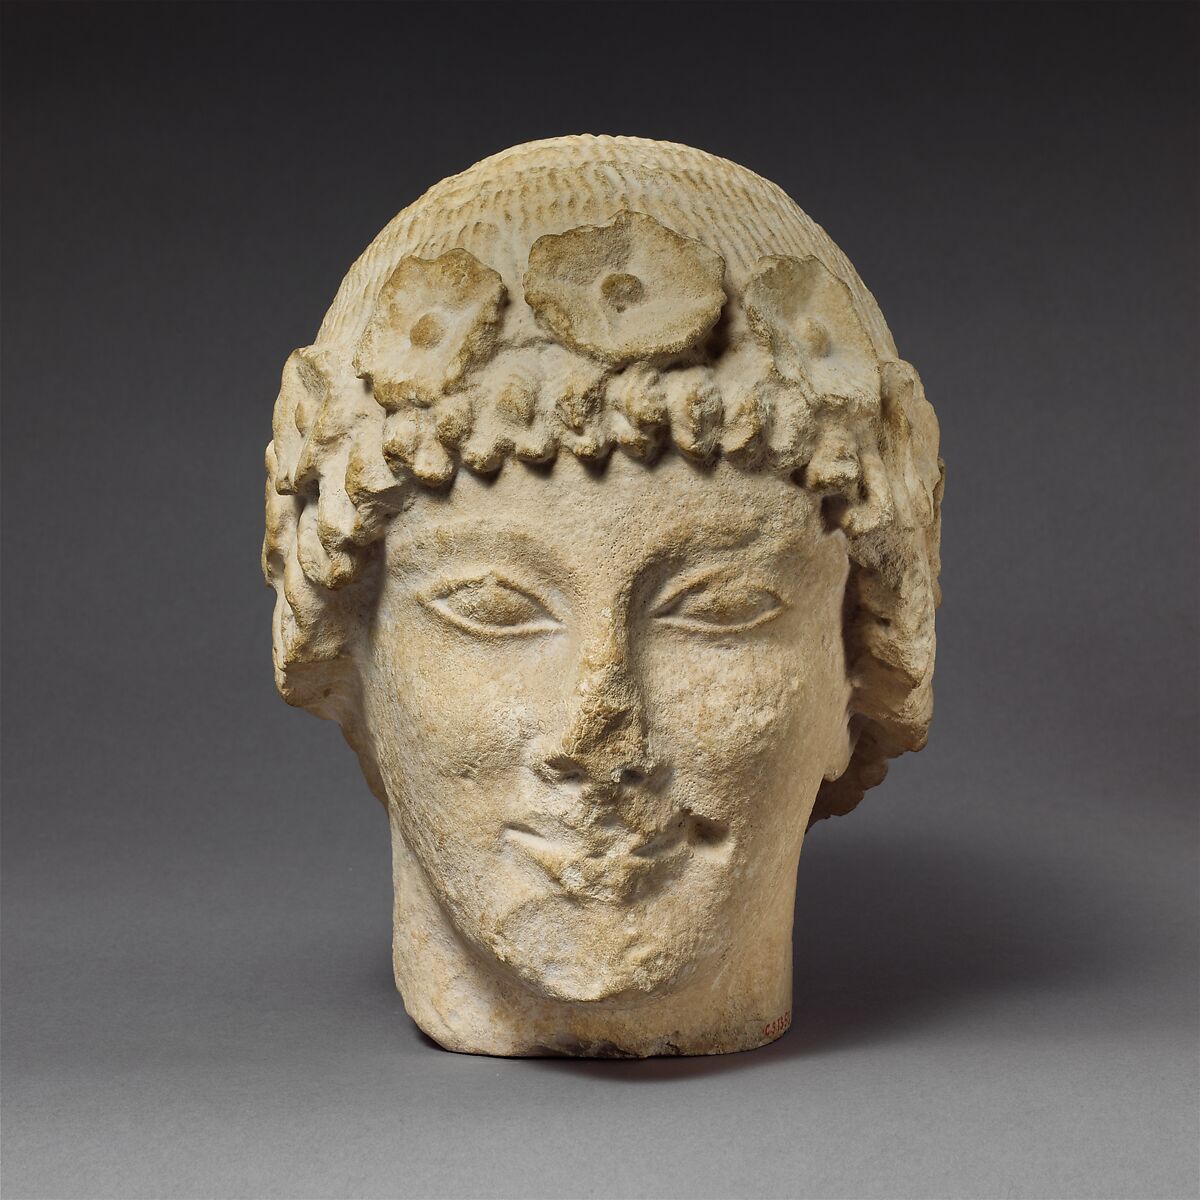 Limestone beardless male head with a wreath of rosettes, Limestone, Cypriot 